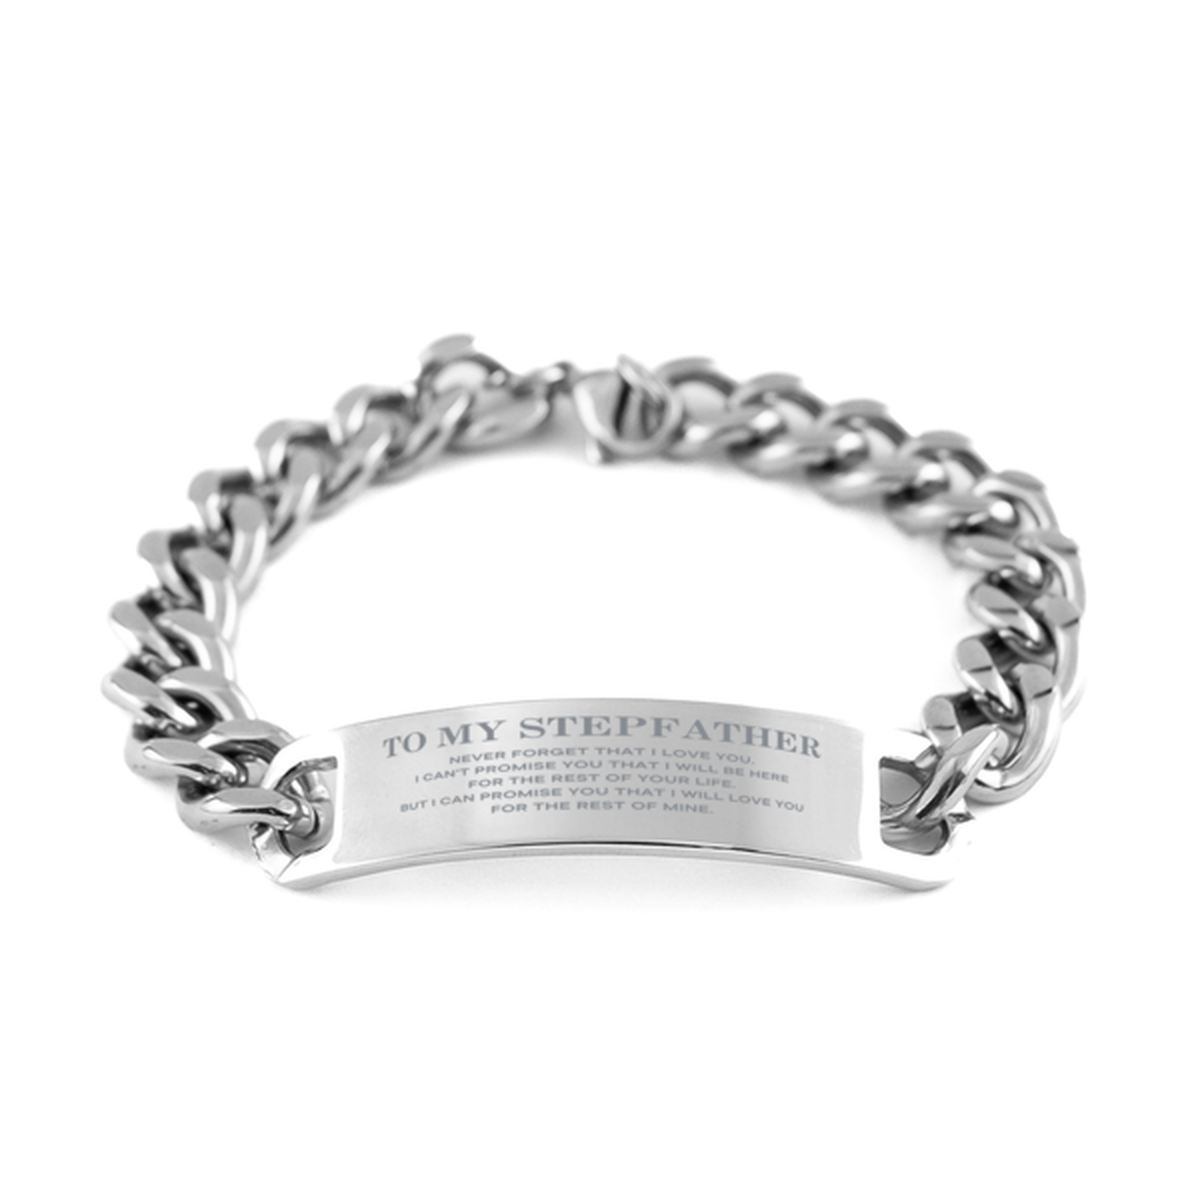 To My Stepfather Gifts, I will love you for the rest of mine, Love Stepfather Bracelet, Birthday Christmas Unique Cuban Chain Stainless Steel Bracelet For Stepfather